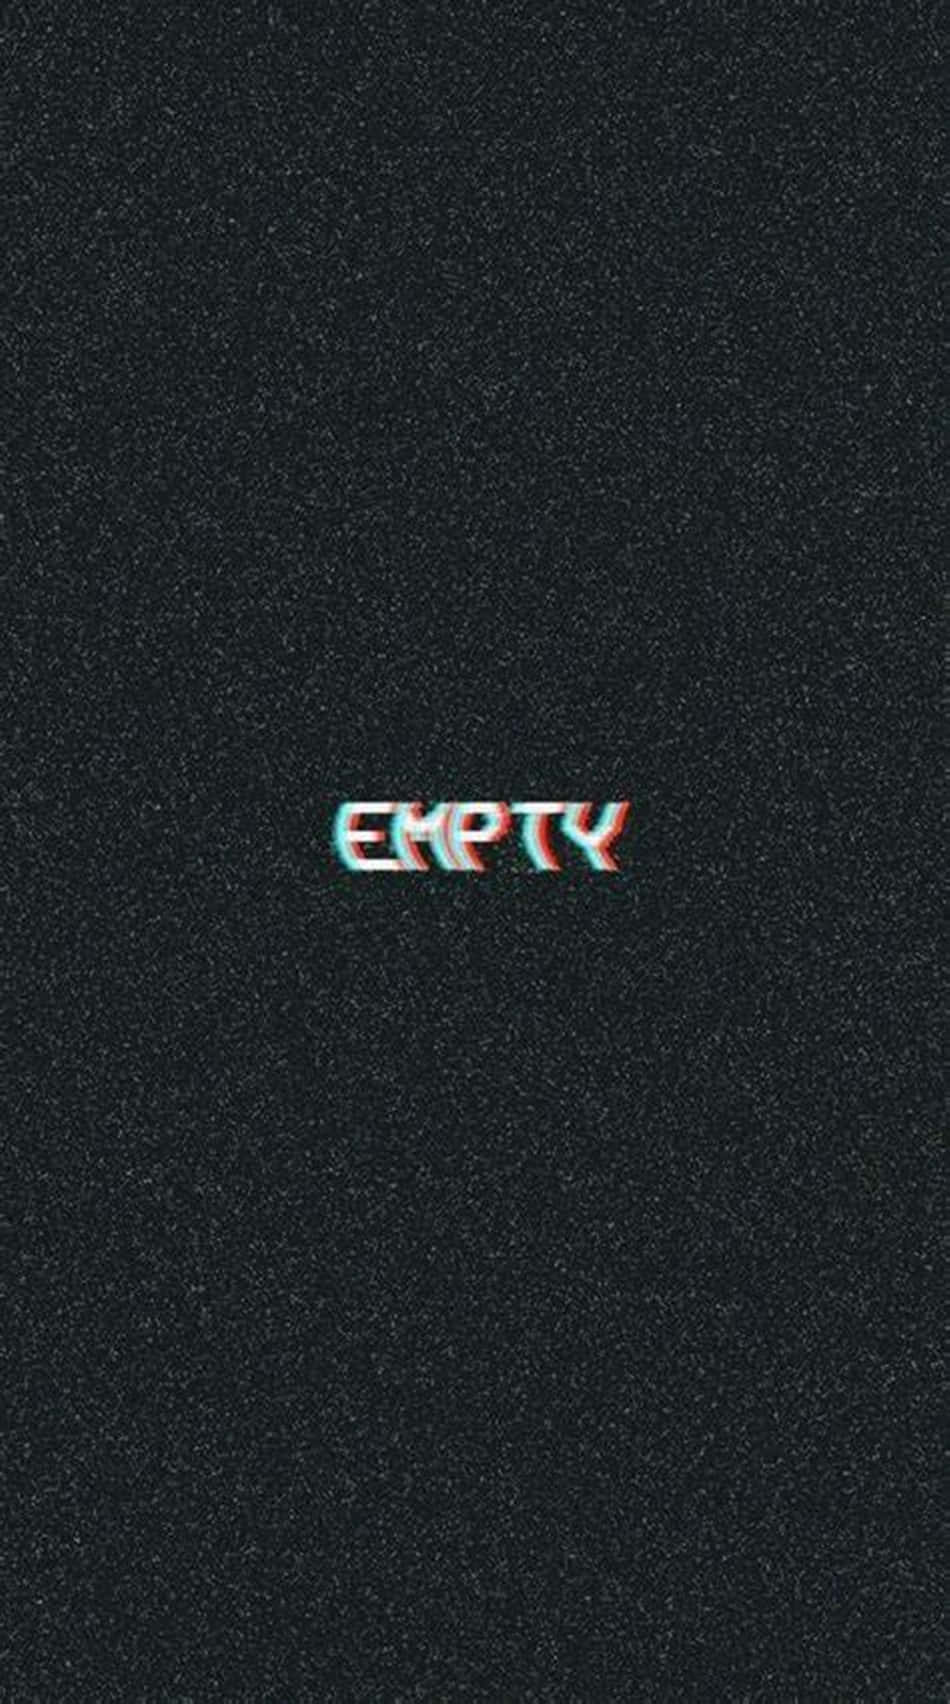 Empty Word In Black And White Aesthetic Phone Wallpaper